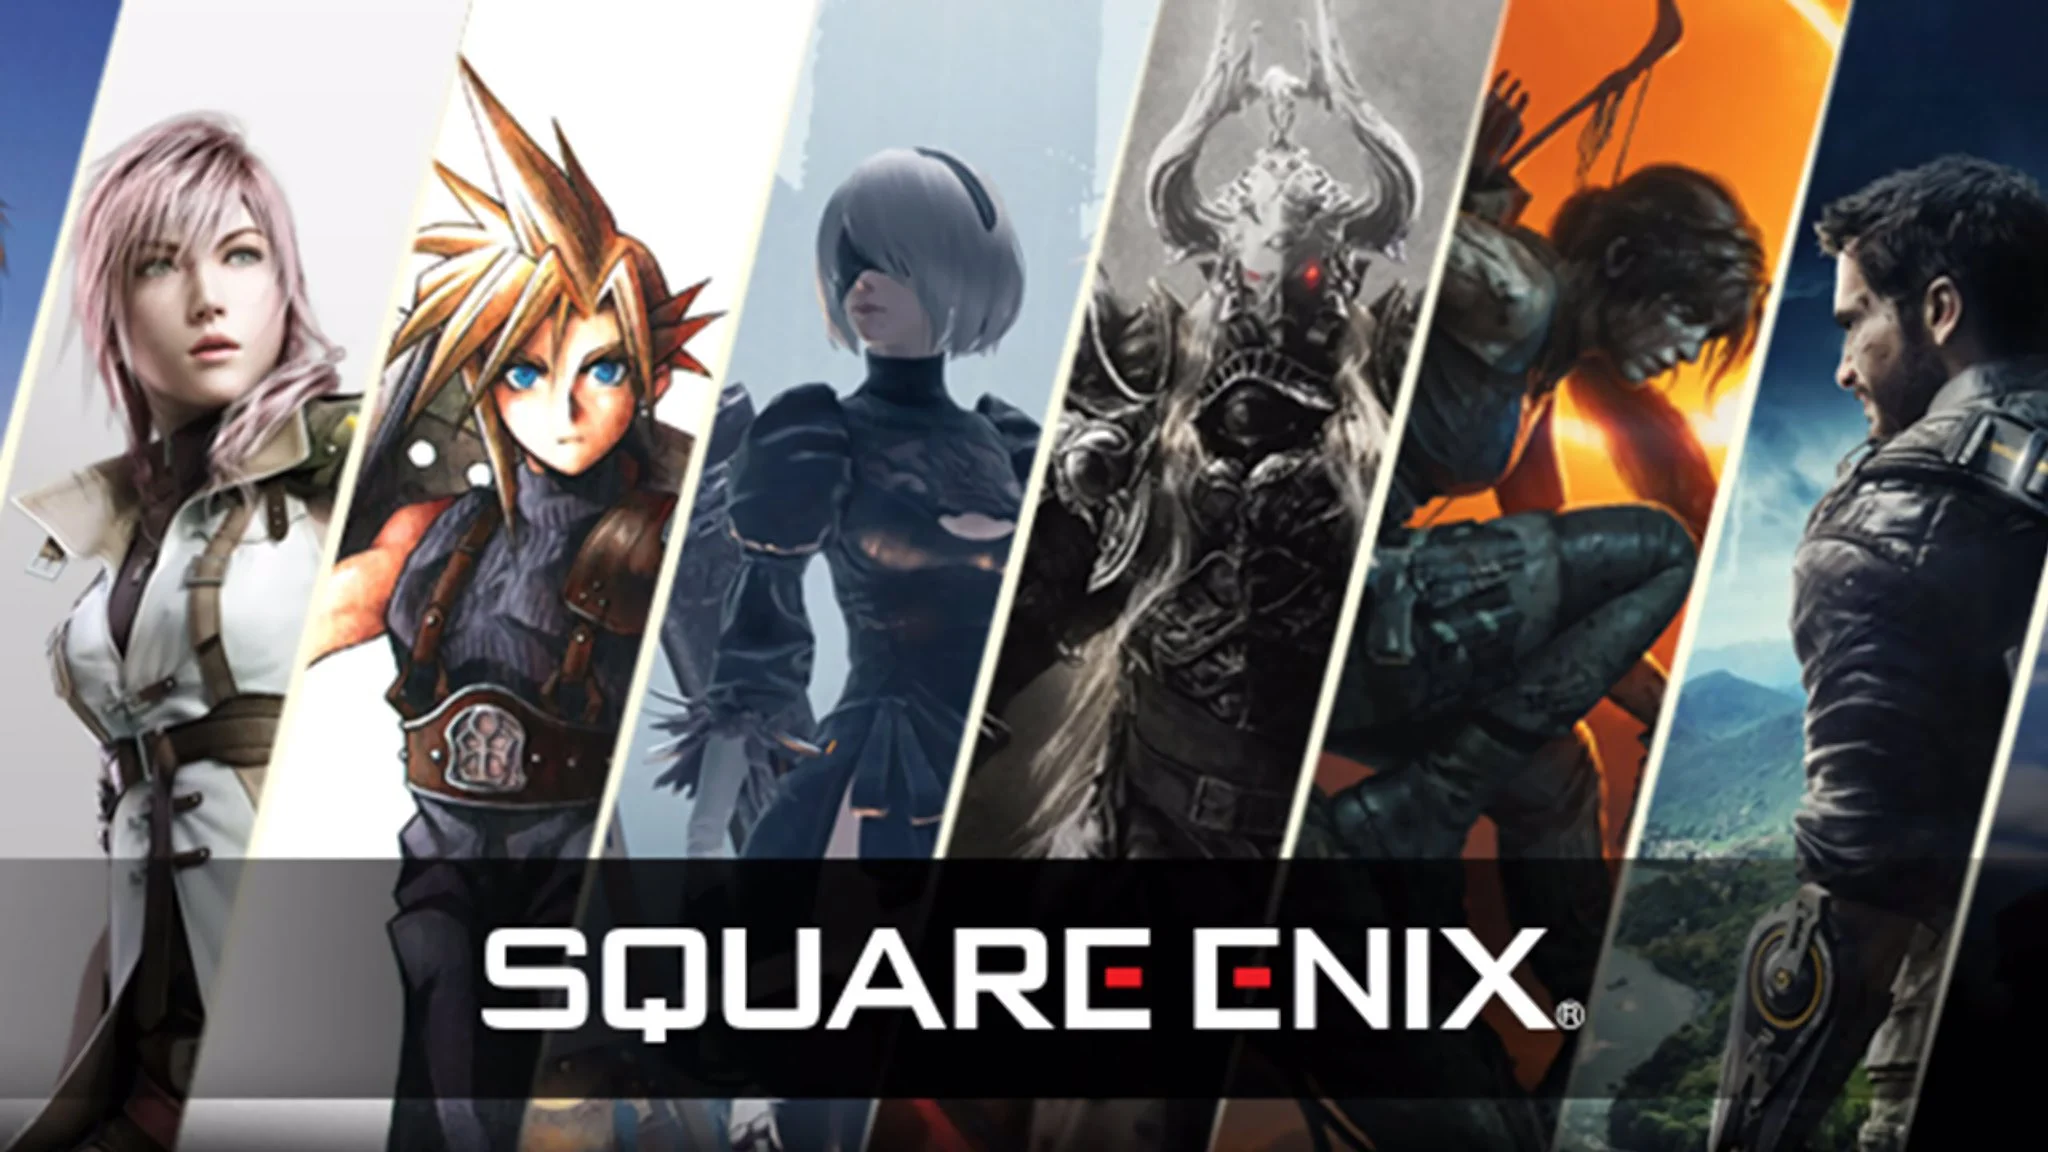 Gaming Giant Square Enix to Invest in Web3 Gaming